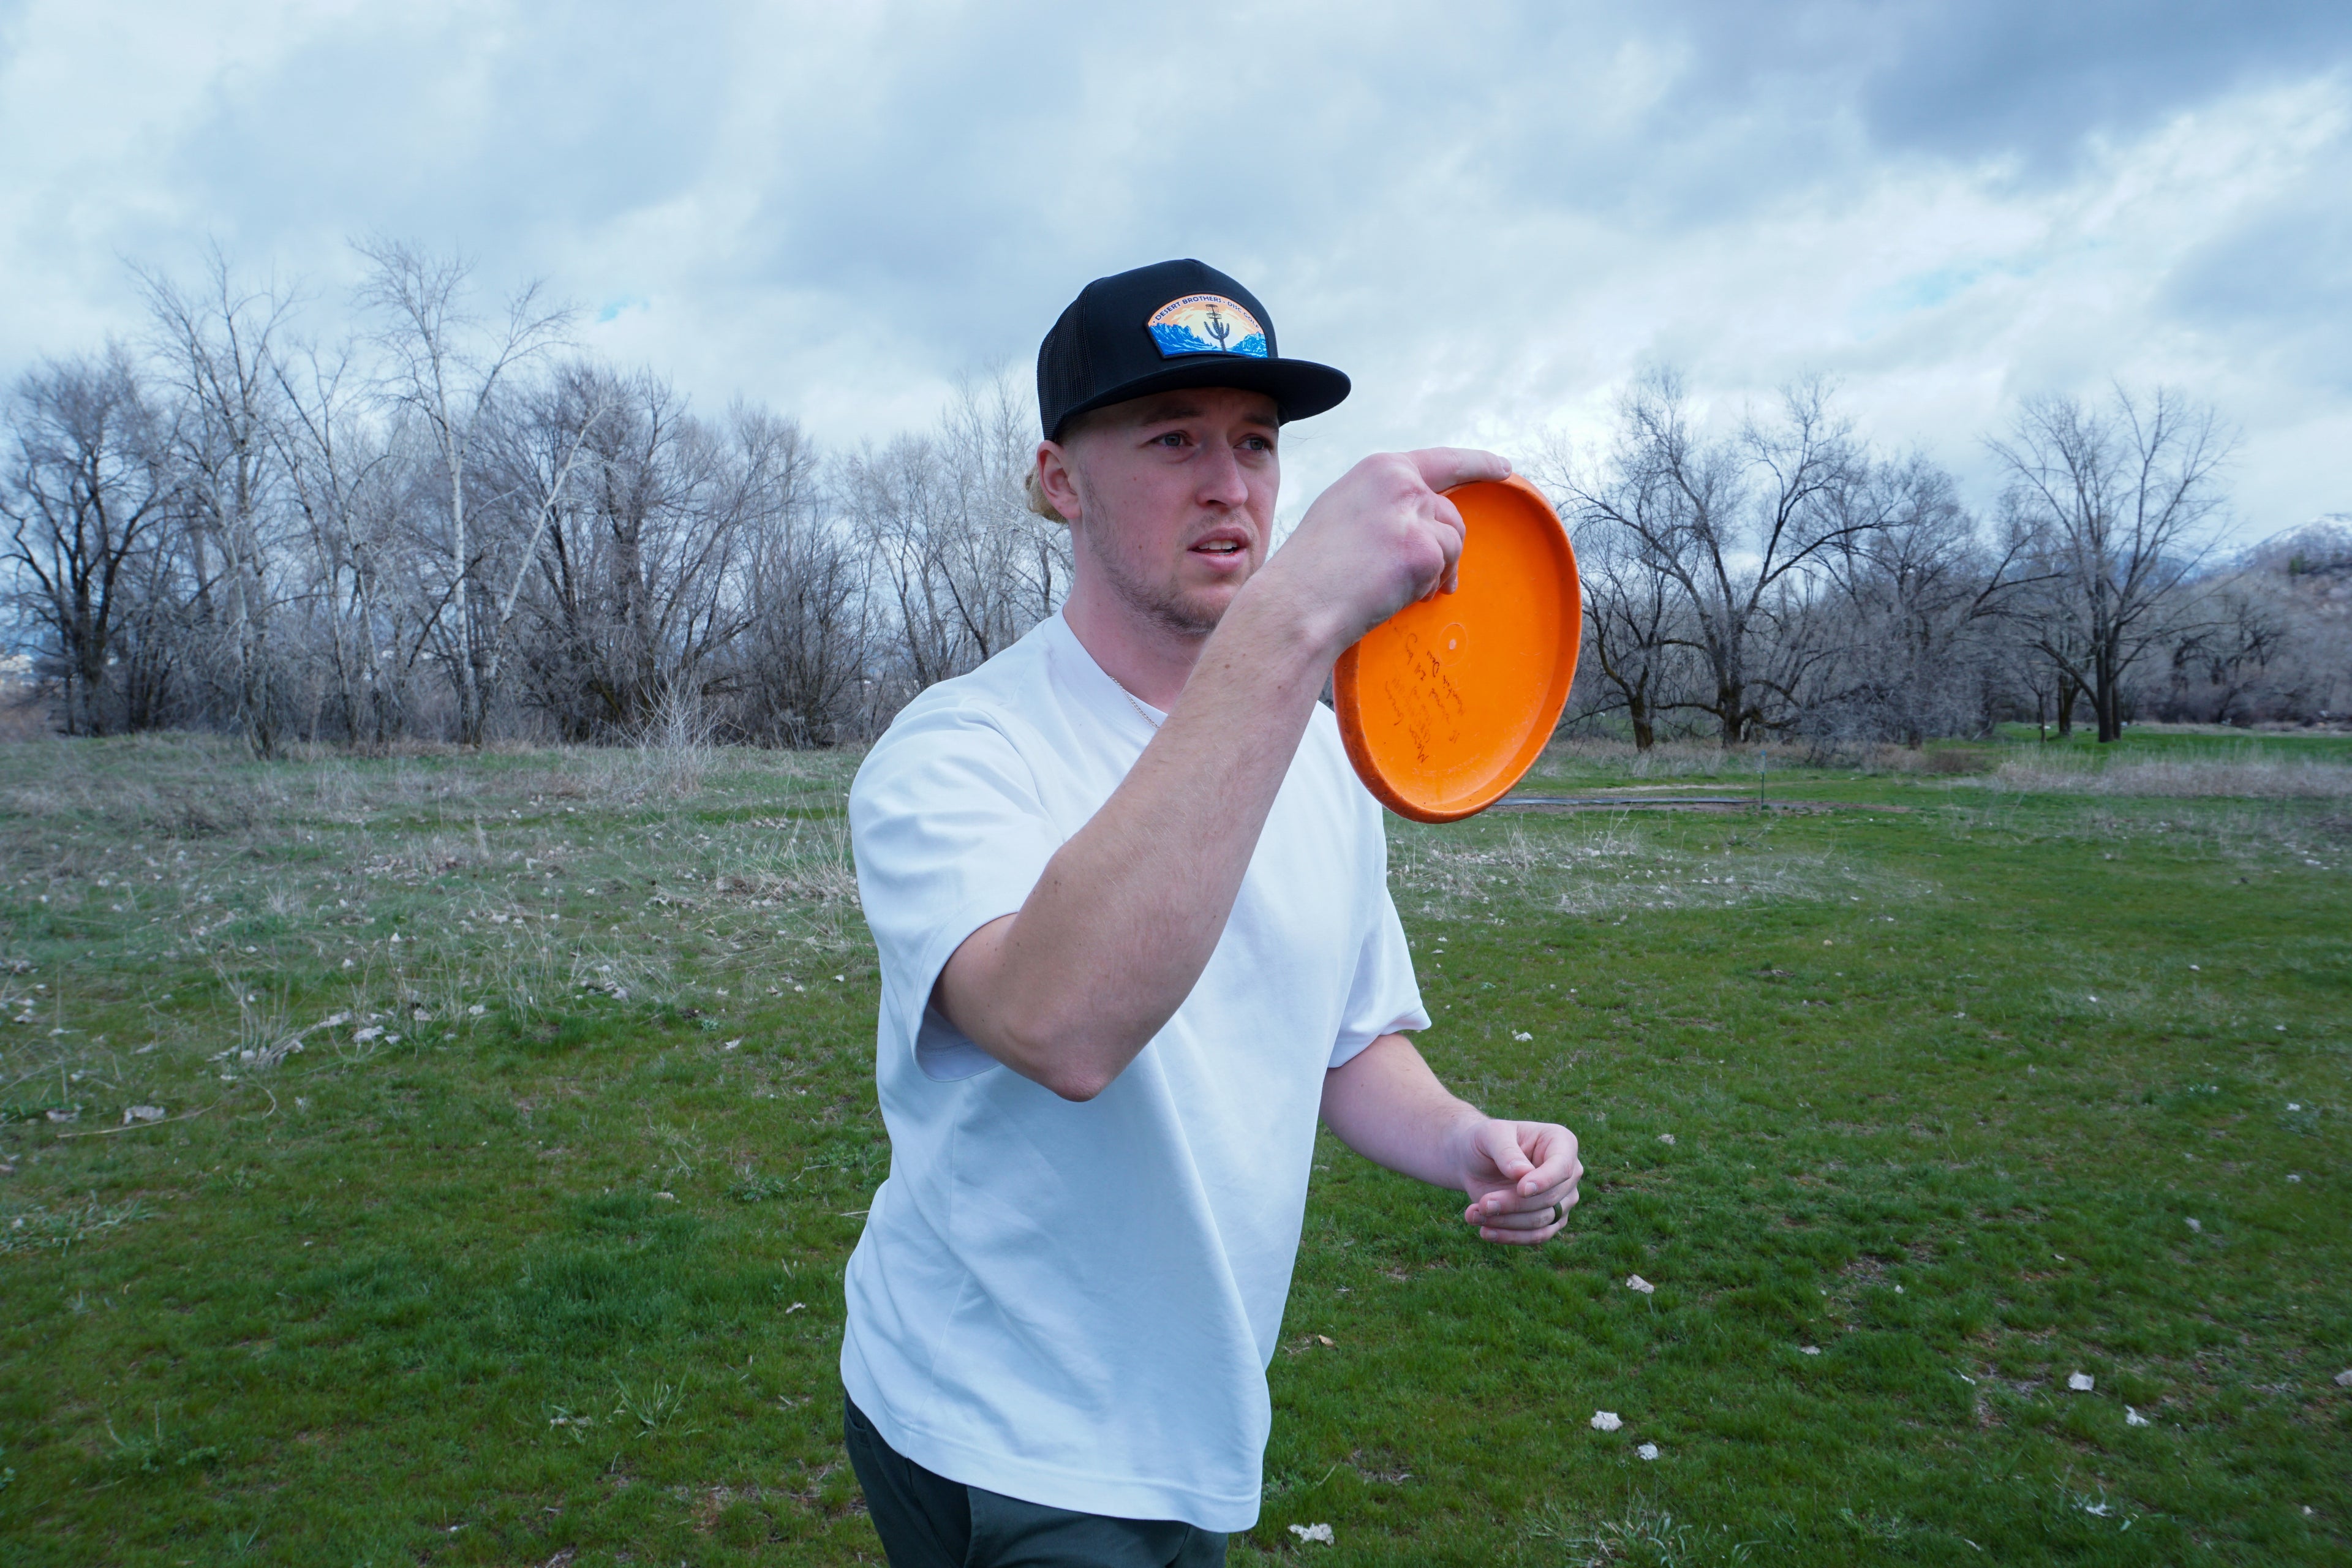 Photo of disc golf player putting. Wearing a cool Disc golf hat, made by Desert Brothers